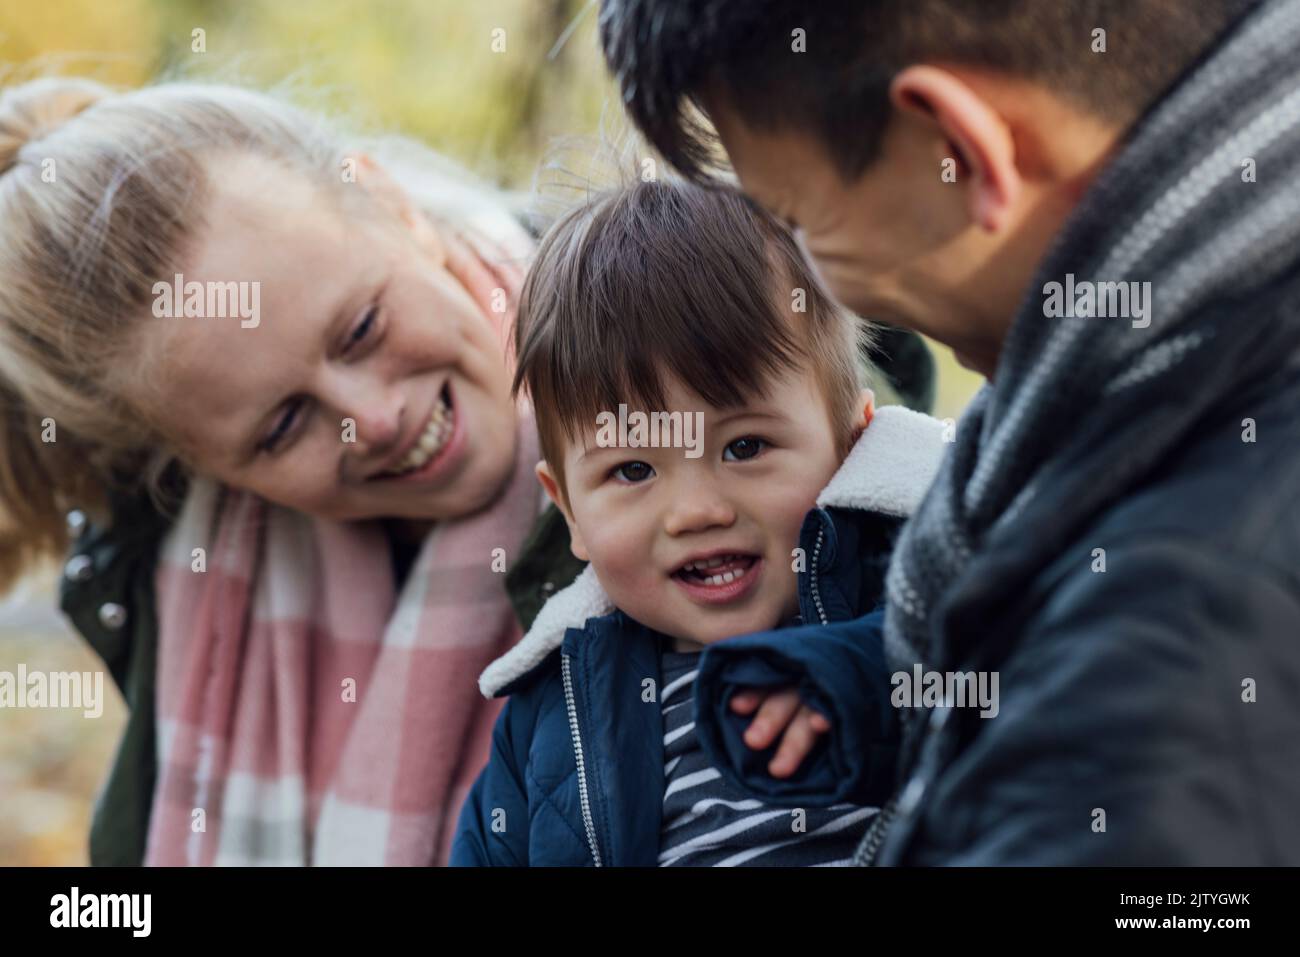 A family spending a day in nature together in Northumberland, North East England during Autumn. The parents are looking at their baby boy while the bo Stock Photo